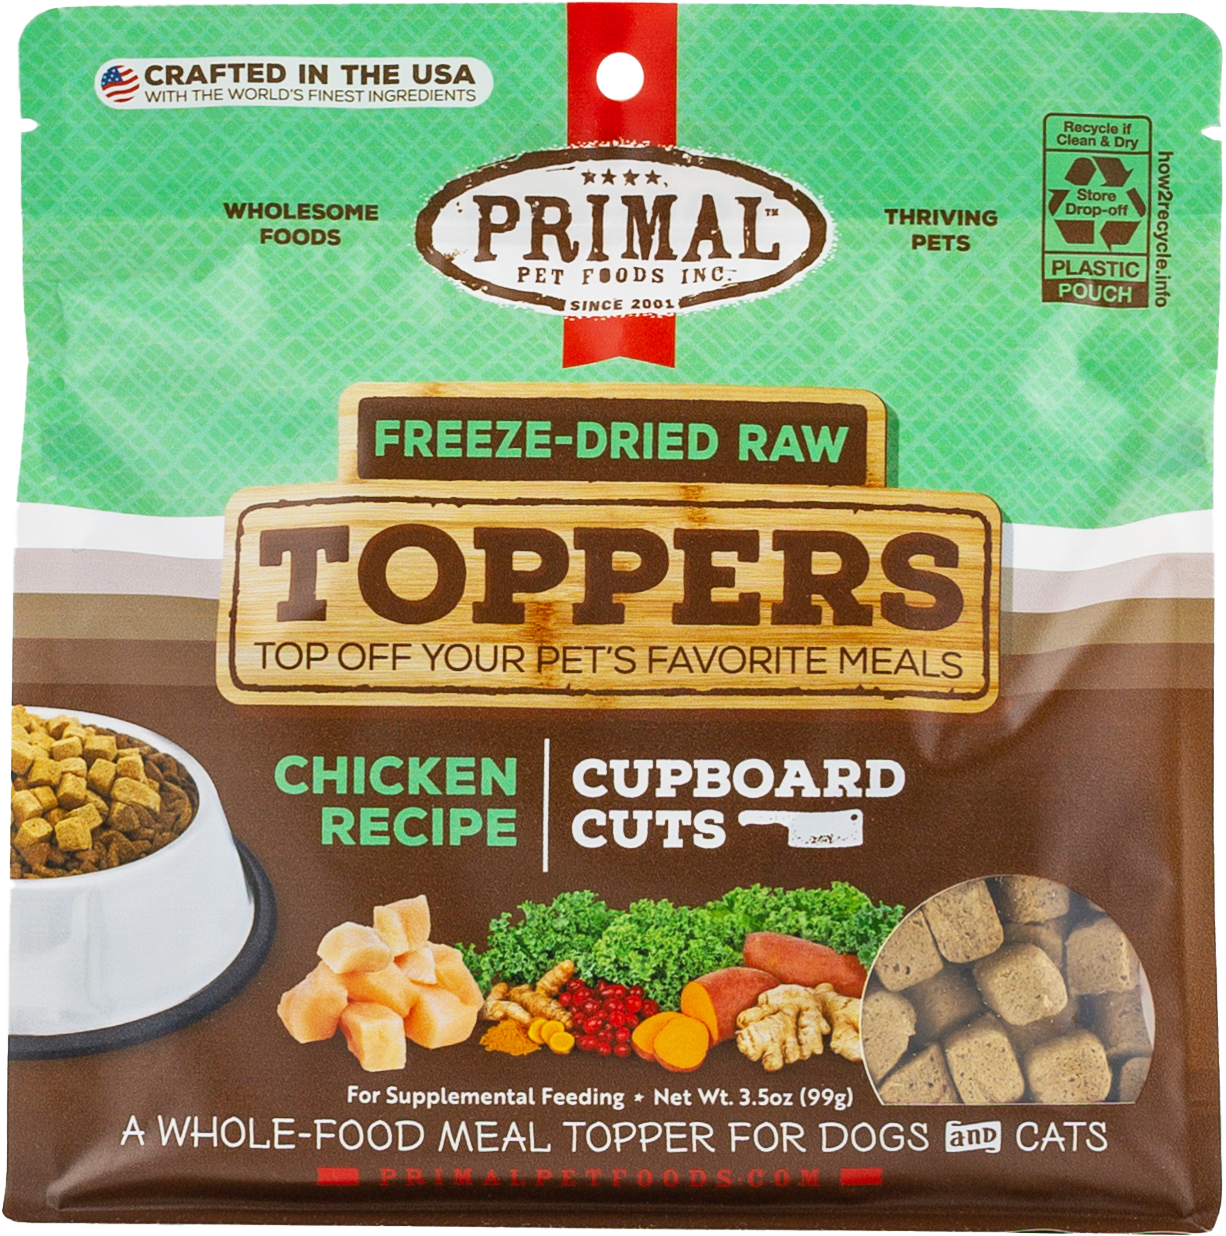 Primal Cupboard Cuts Freeze-Dried Raw Toppers - Chicken, 3.5 oz